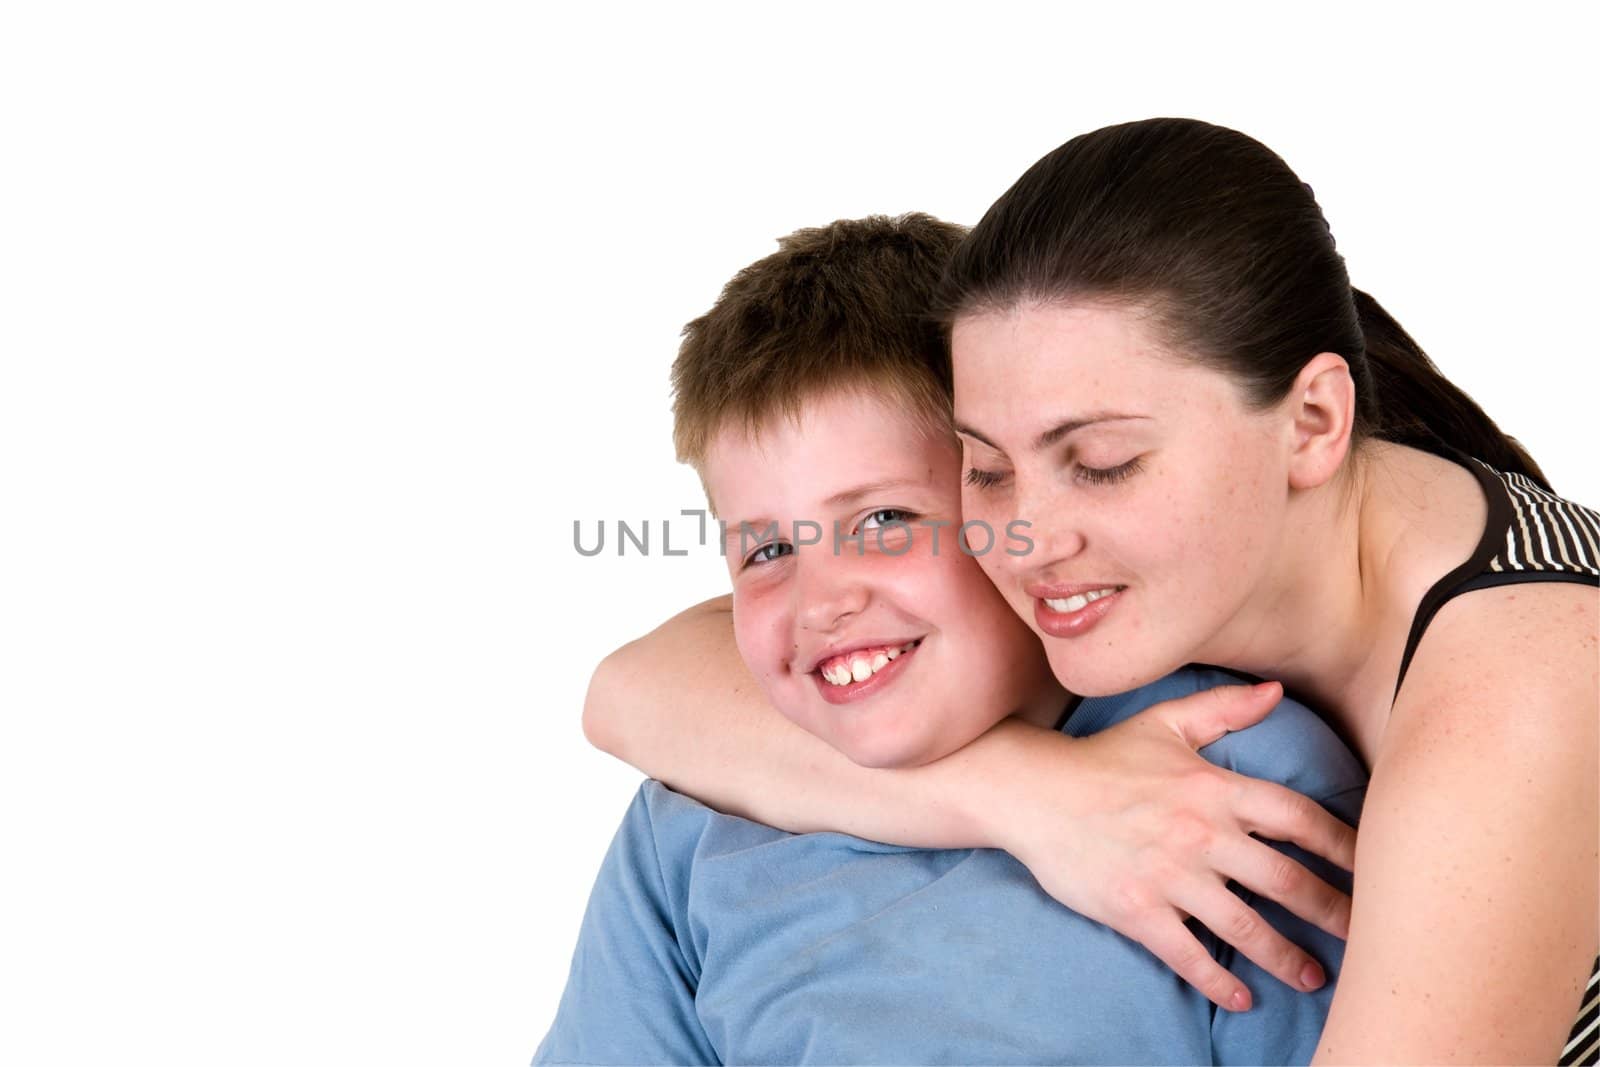 Smiling family. Mum and the son on a white background.